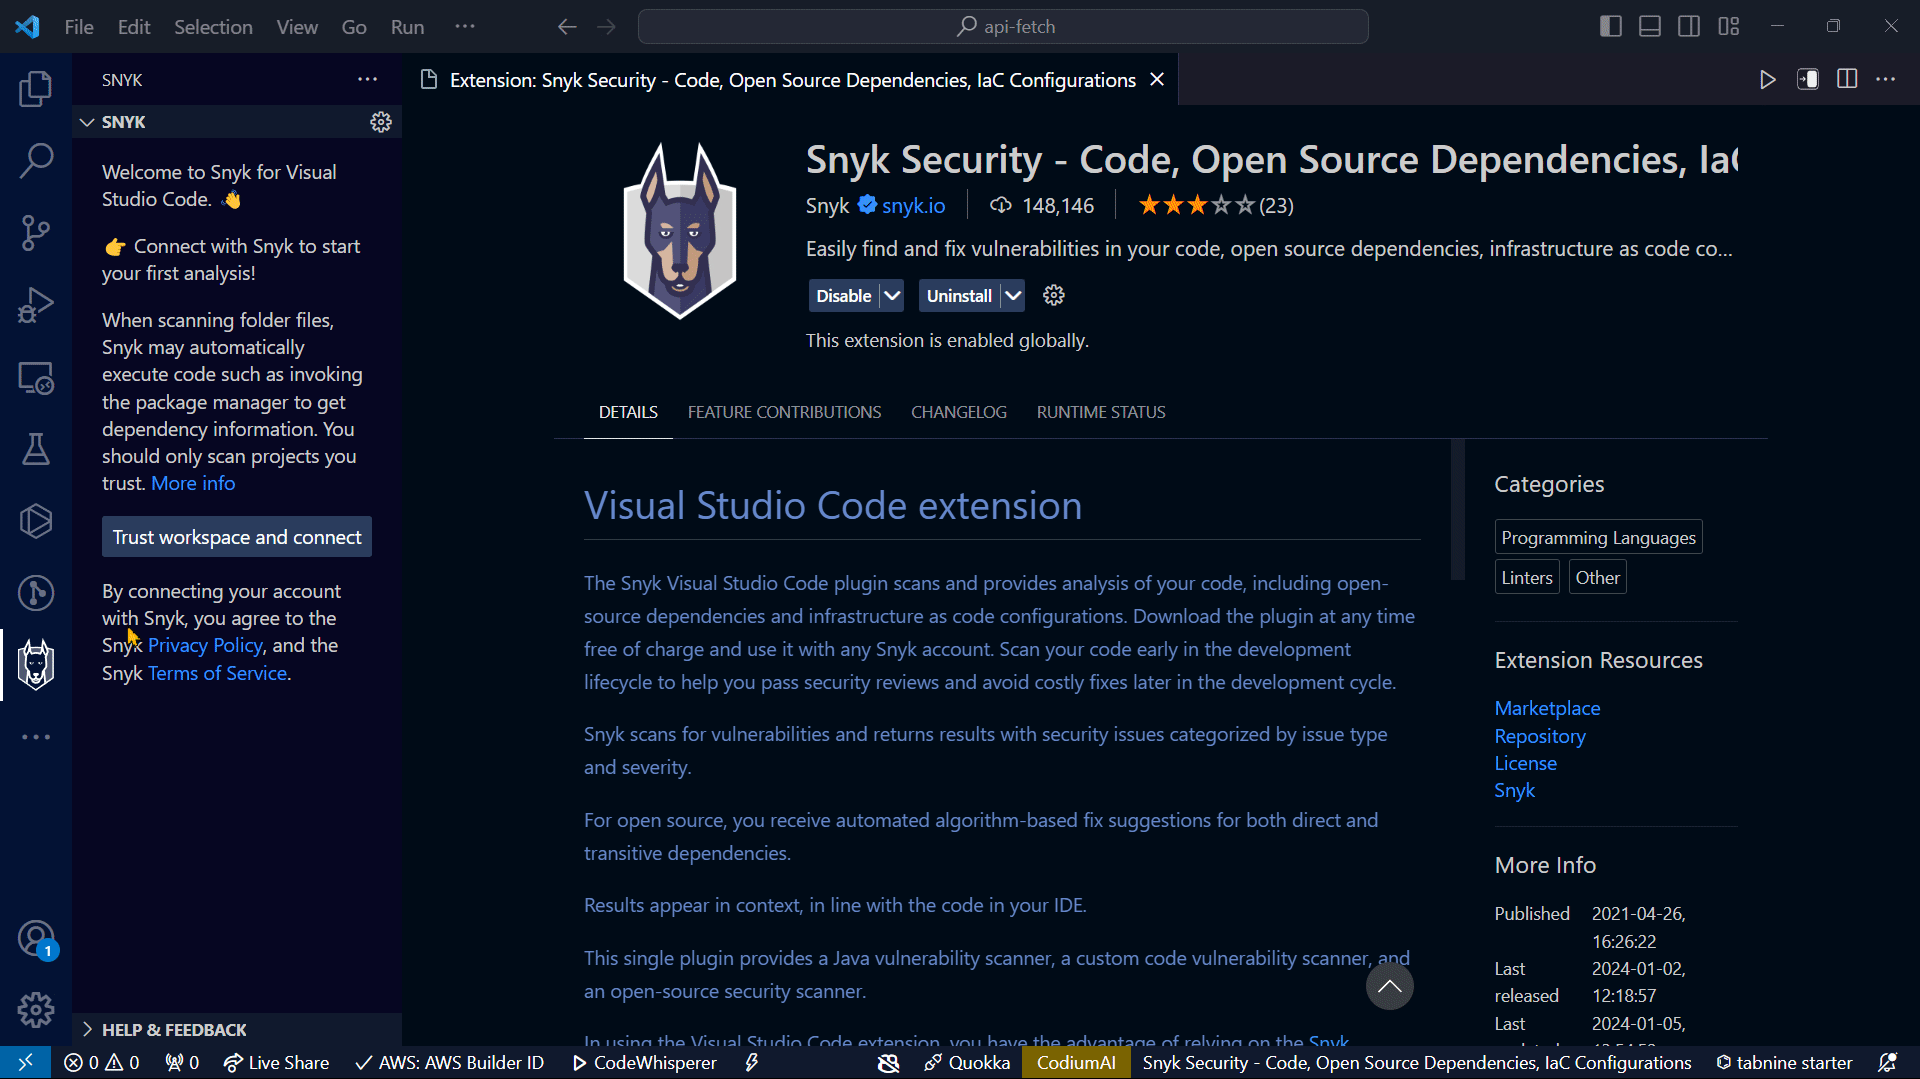 Authenticate and connect to so it works with your visual studio code